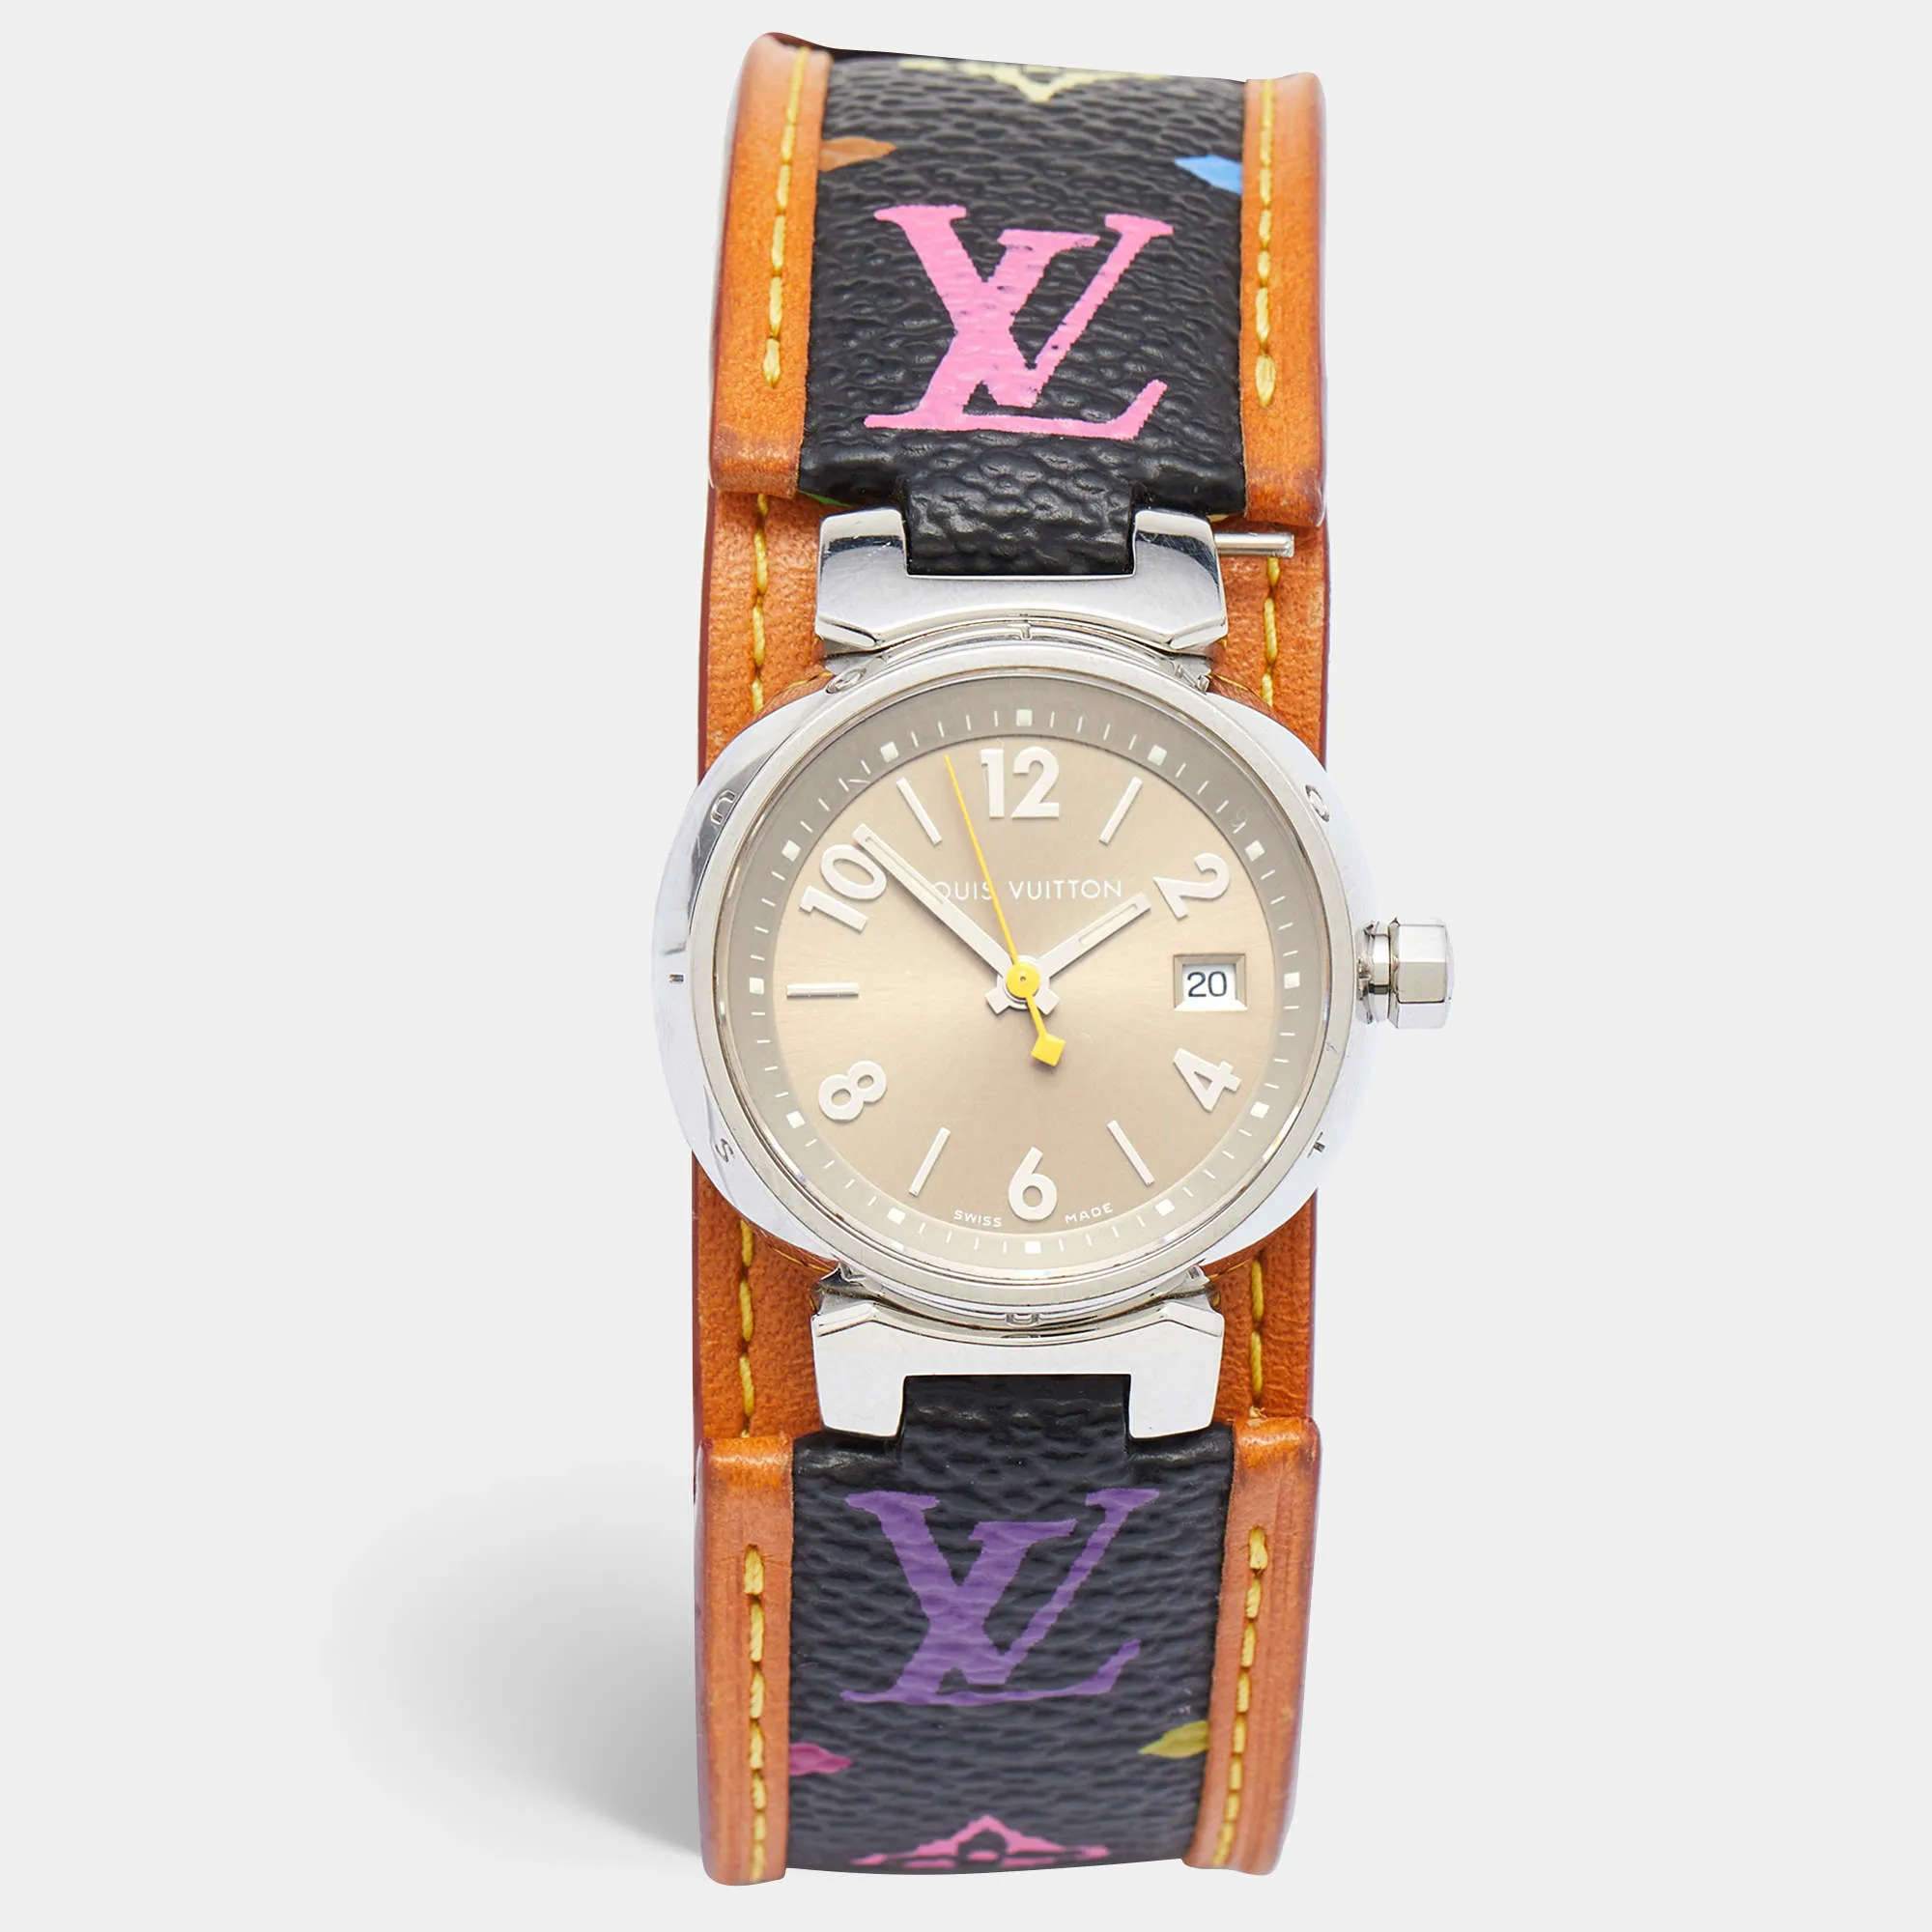 Louis Vuitton Tambour Q1212 28mm Stainless steel